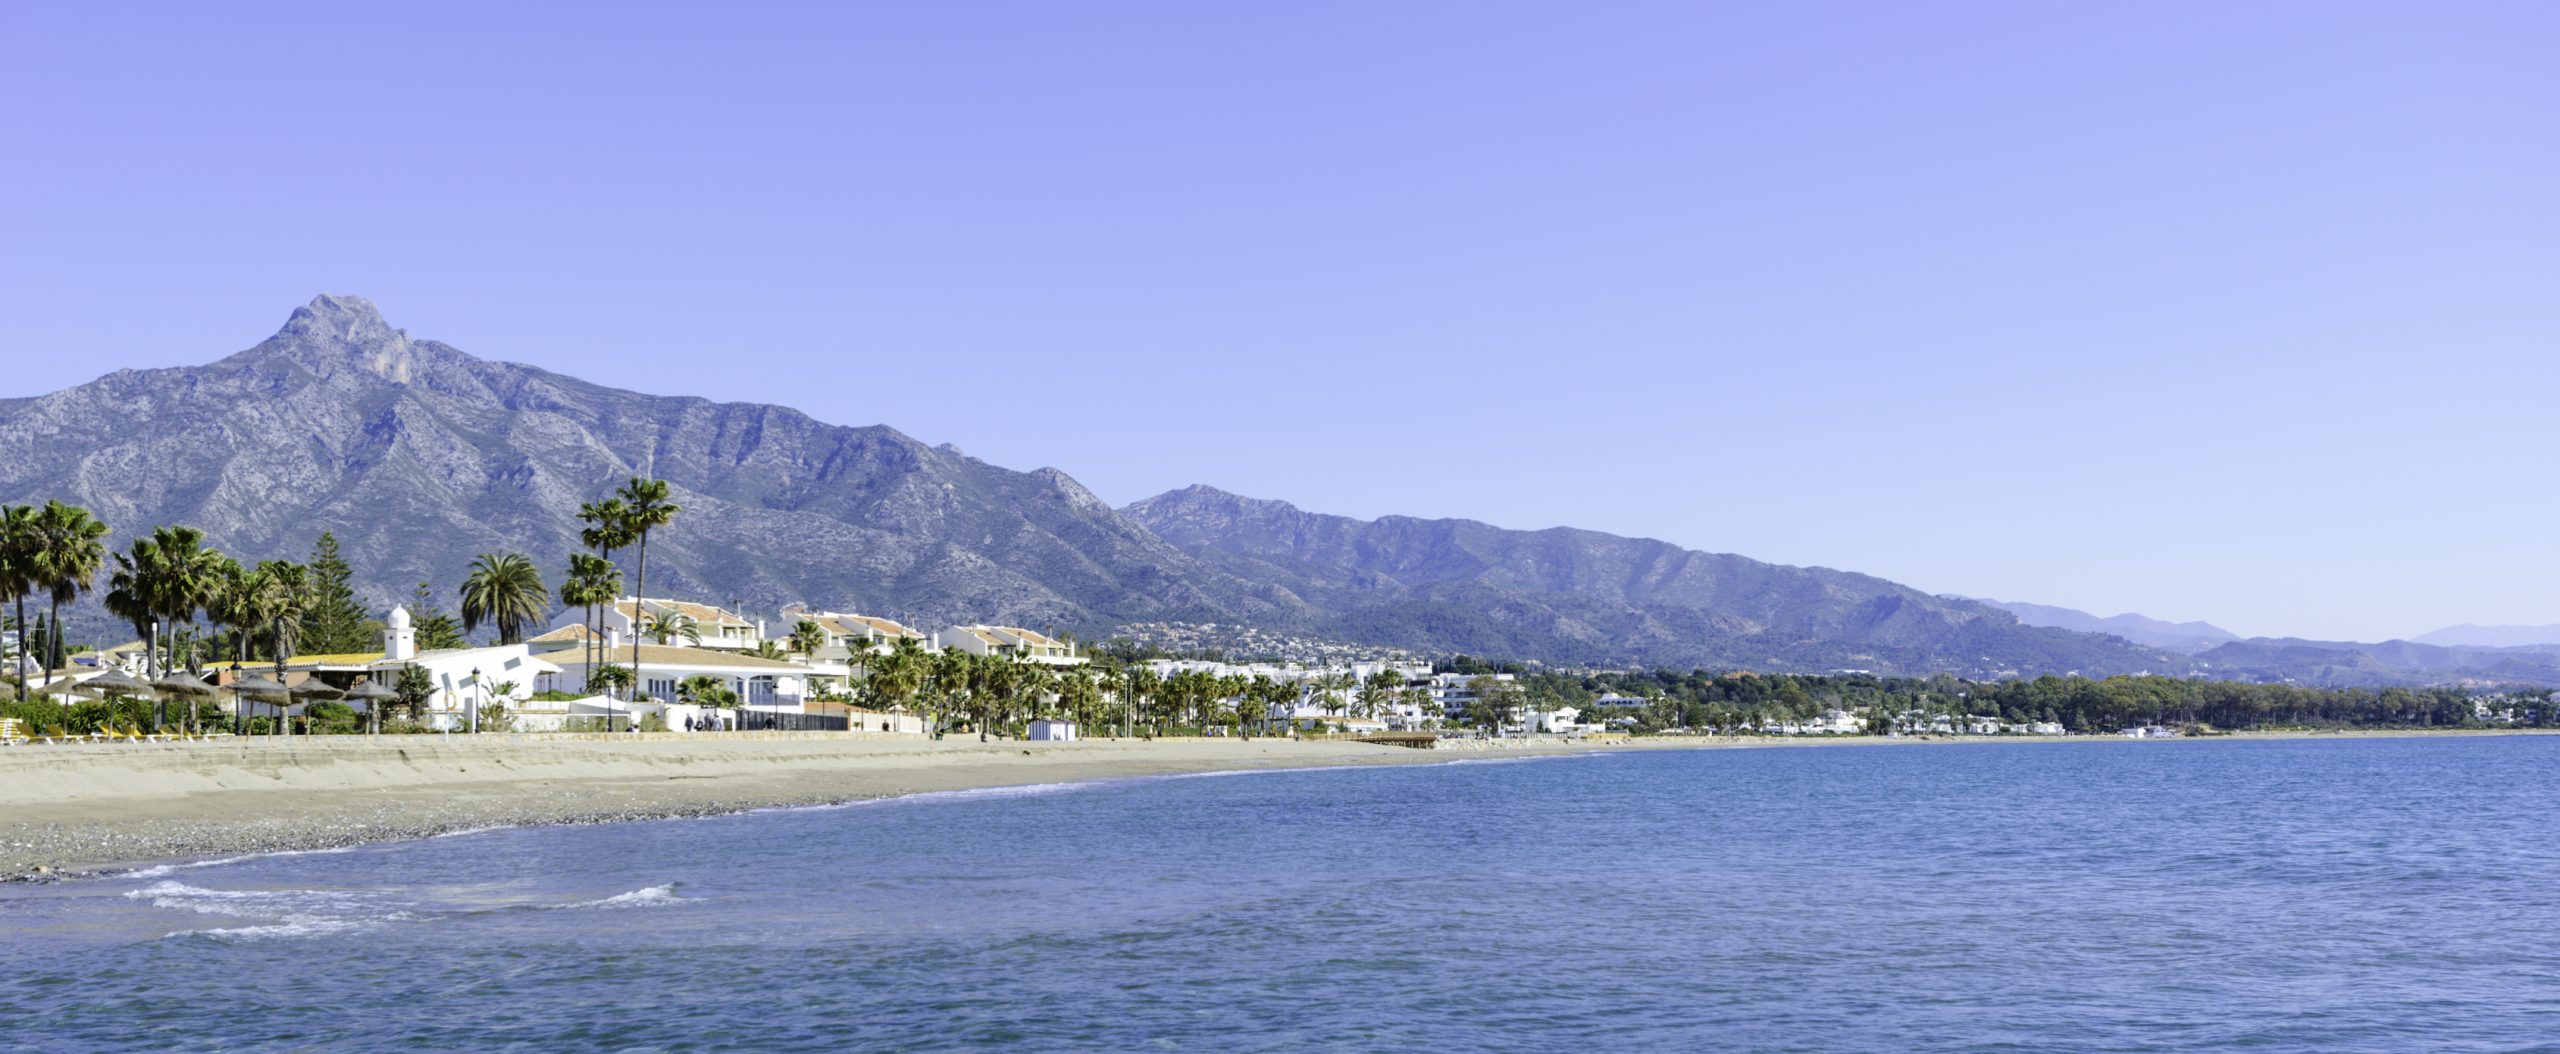 The Future of the Costa del Sol. The Costa del Sol is one of the most important tourist areas in Spain. The Costa del Sol has a spectacular future thanks to its impressive tourism product.